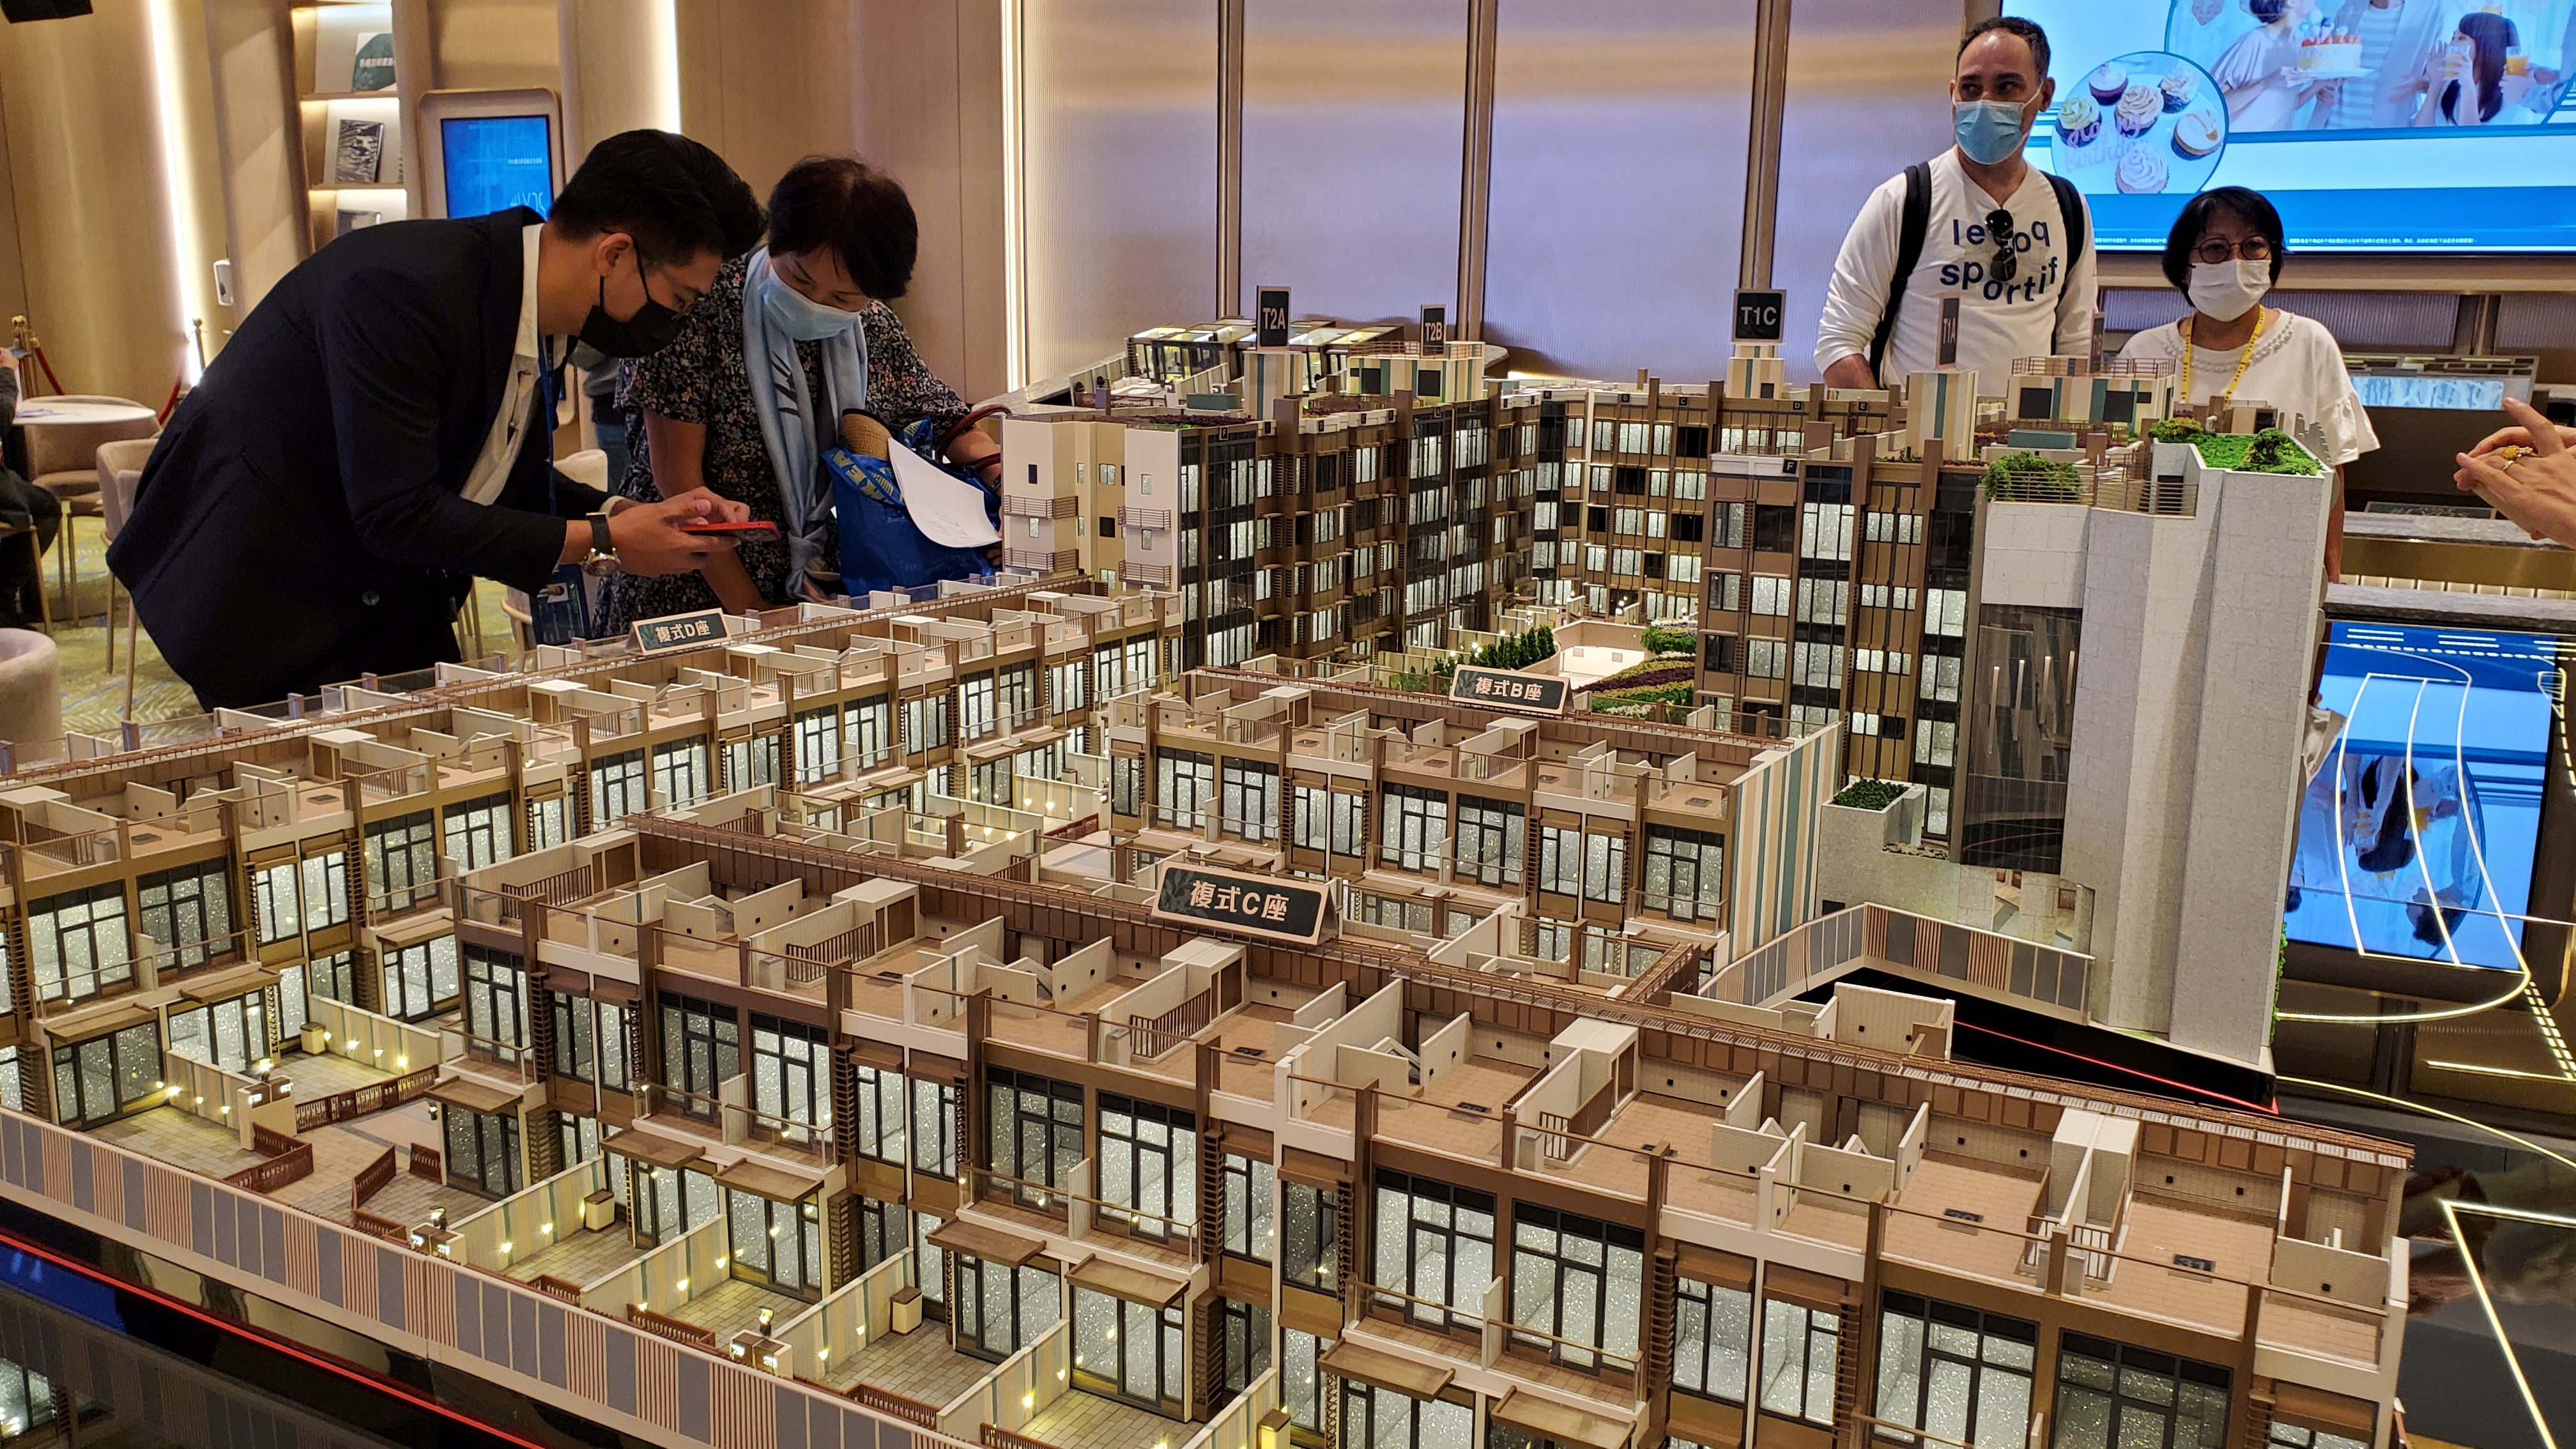 Potential buyers viewing an apartment model at the sales office of the #LYOS housing project at CK Asset Holding’s sales office in Hung Hom on 4 November 2021. Photo: Edmond So